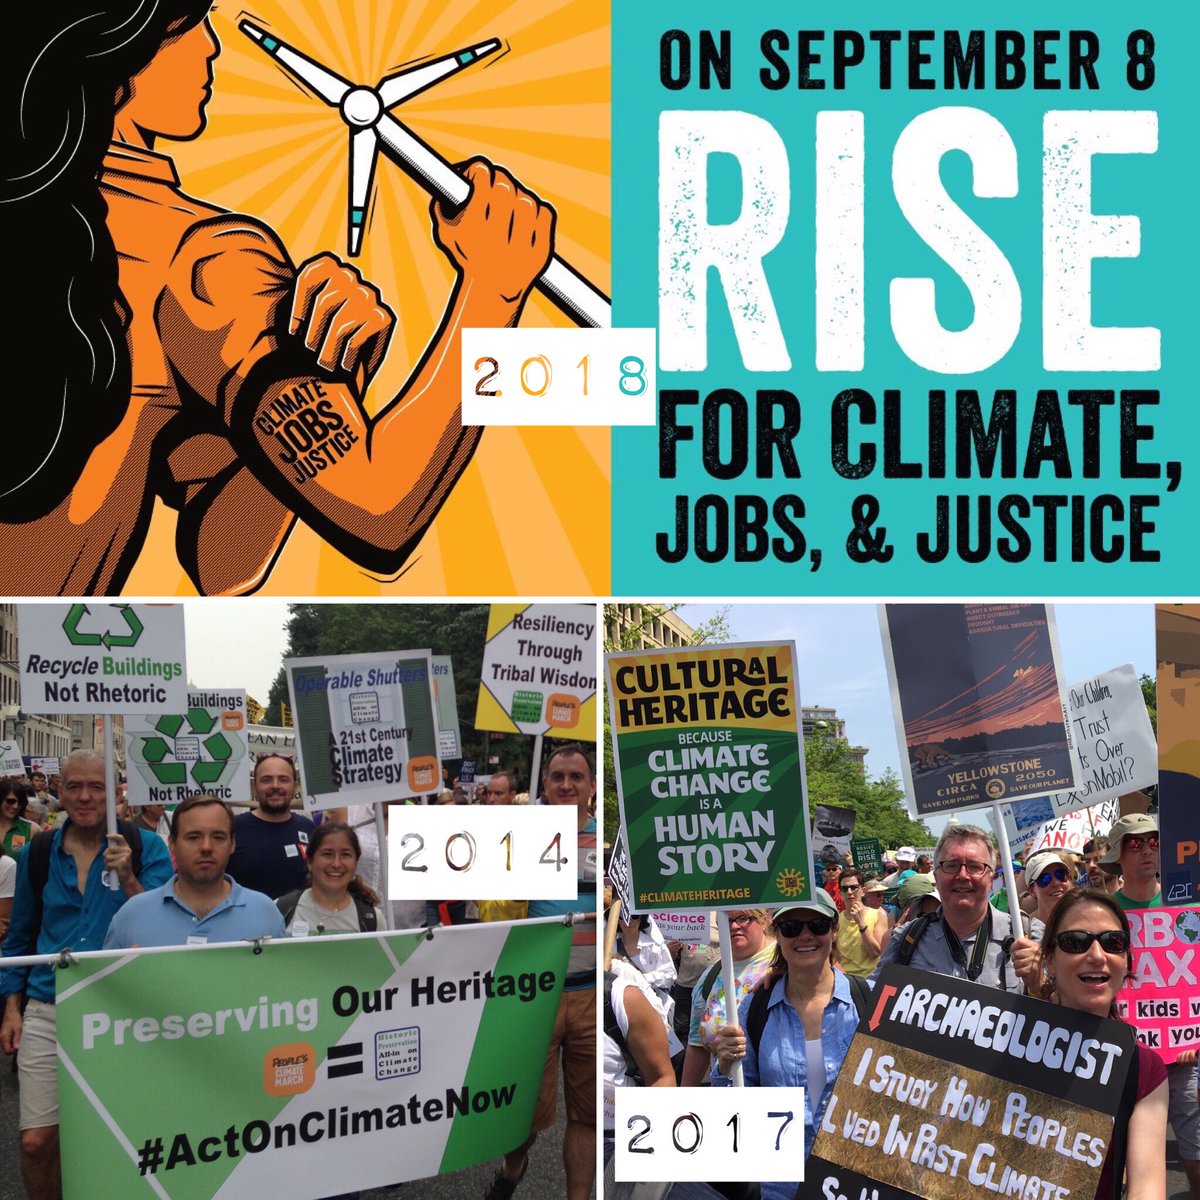 I #RiseForClimate because climate change is a heritage issue.  Use #WhyWeRise to share your #culture4climate story on Twitter & on Sept 8 bring a #climateheritage message to a riseforclimate.org action near you.